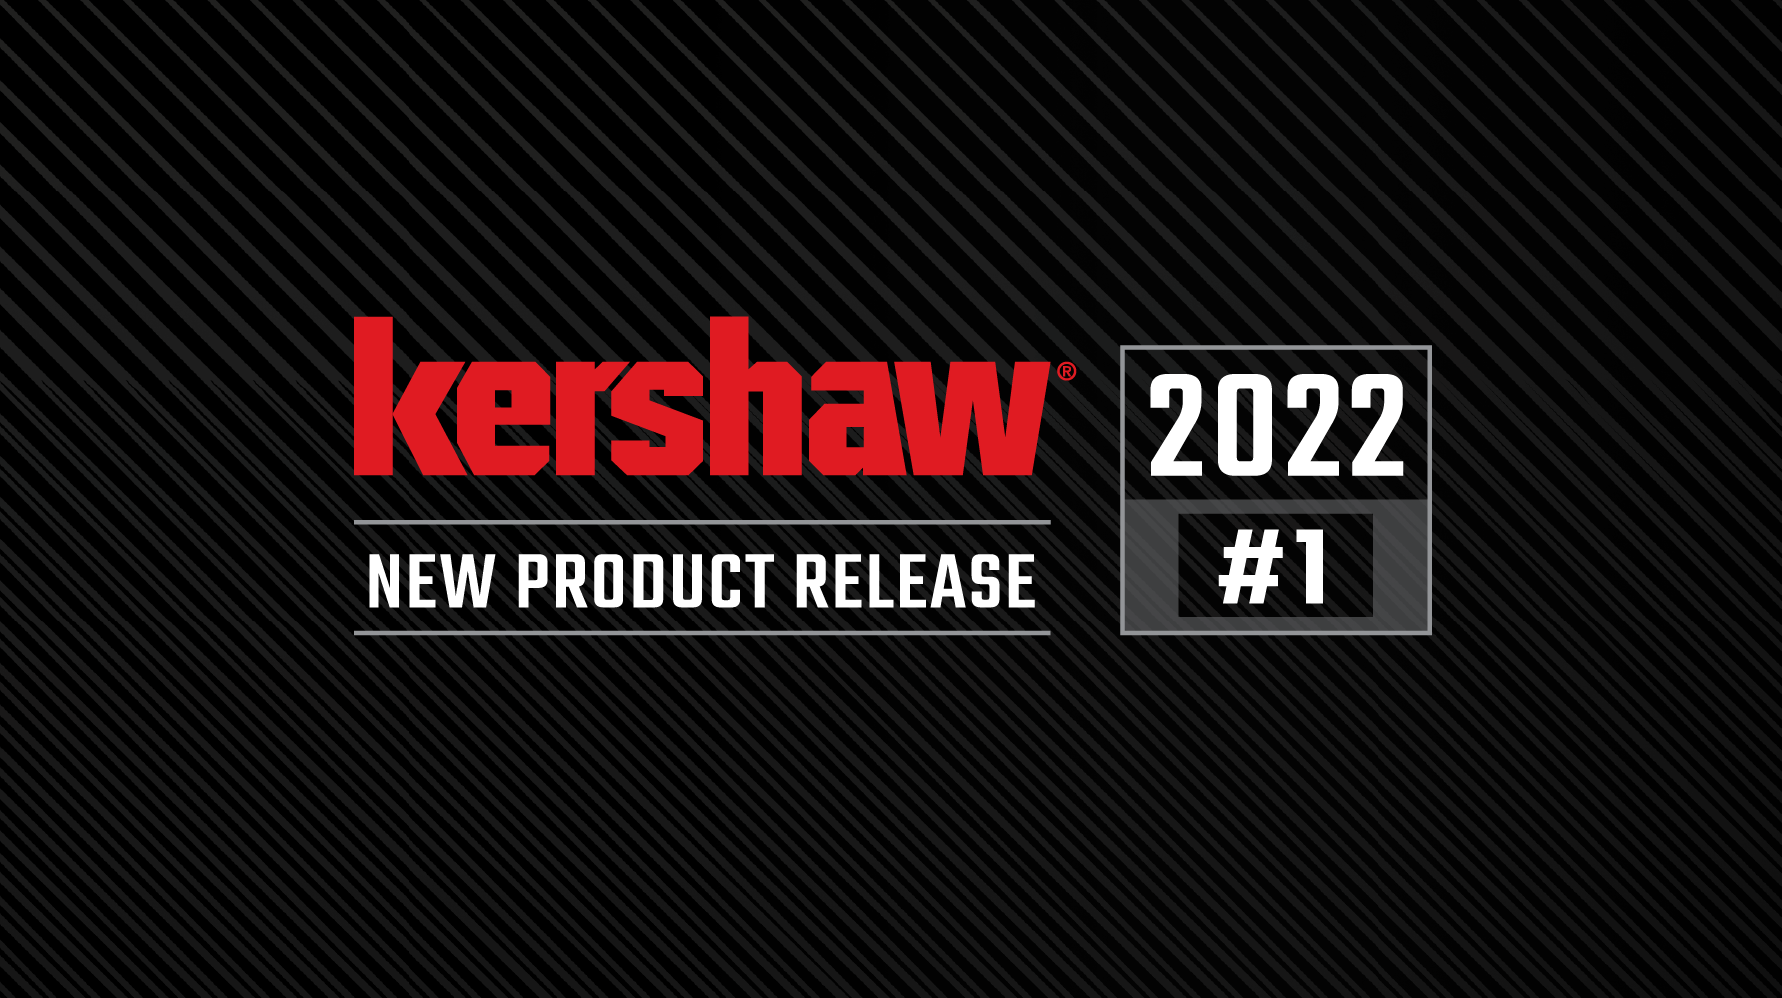 Product Release 2022